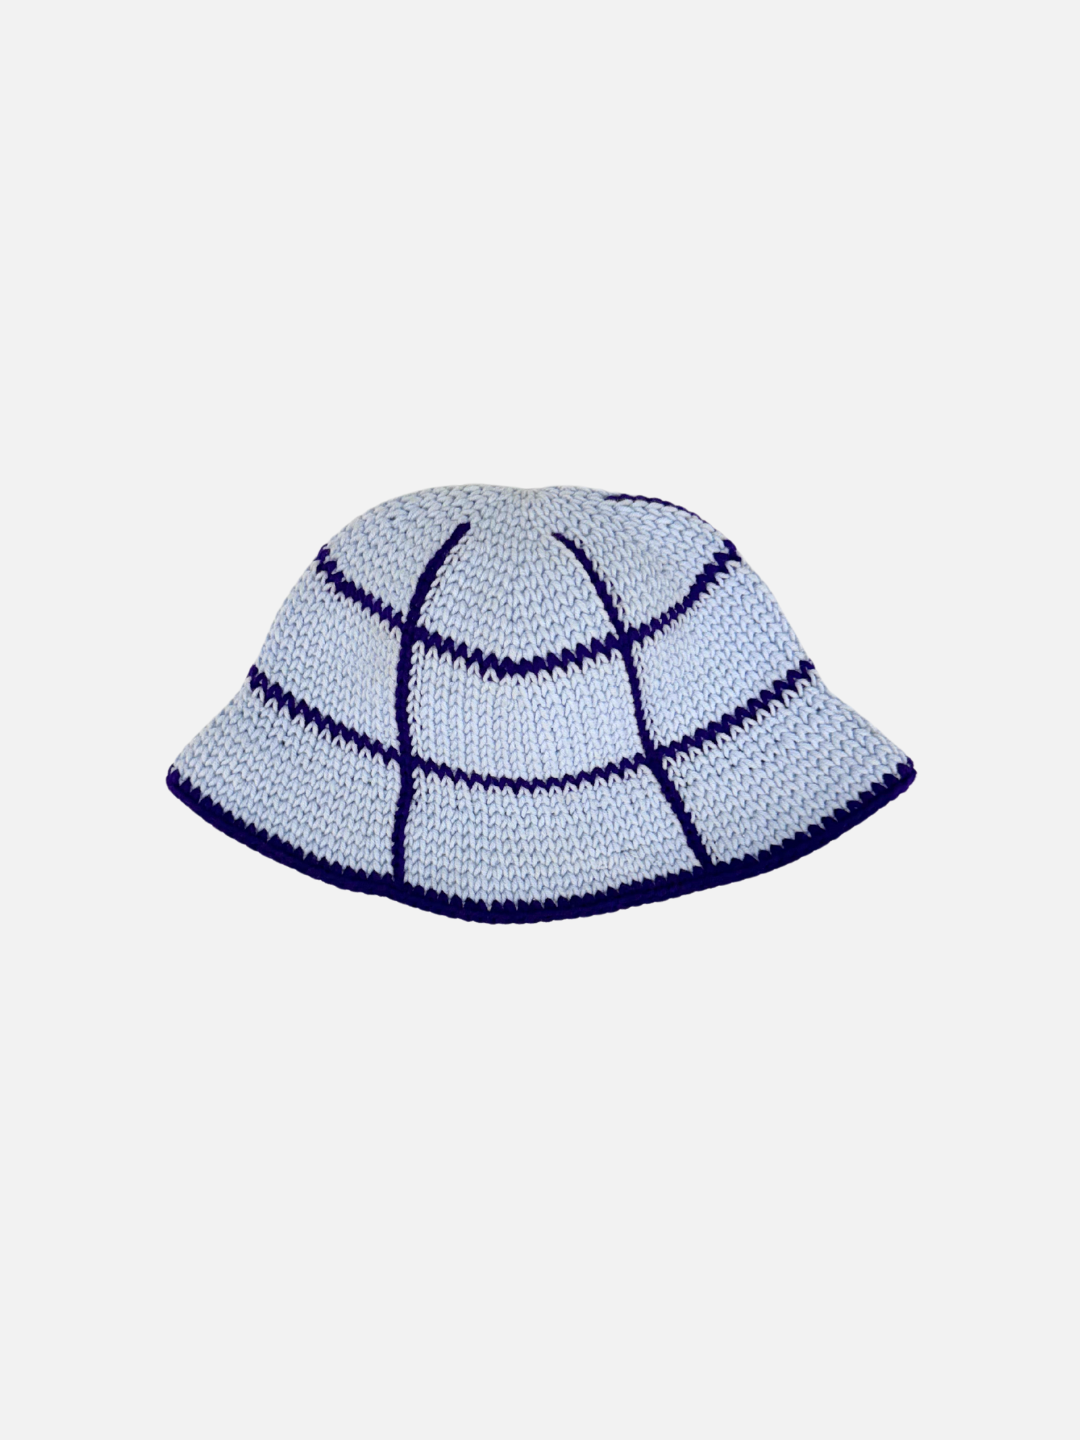 The HAND-CROCHETED GRID HAT - 3-6Y features a white base with a grid design made up of thick navy blue lines. Made from cotton yarn, this hat has a slightly flared brim and offers a lightweight, casual feel against its plain white backdrop.